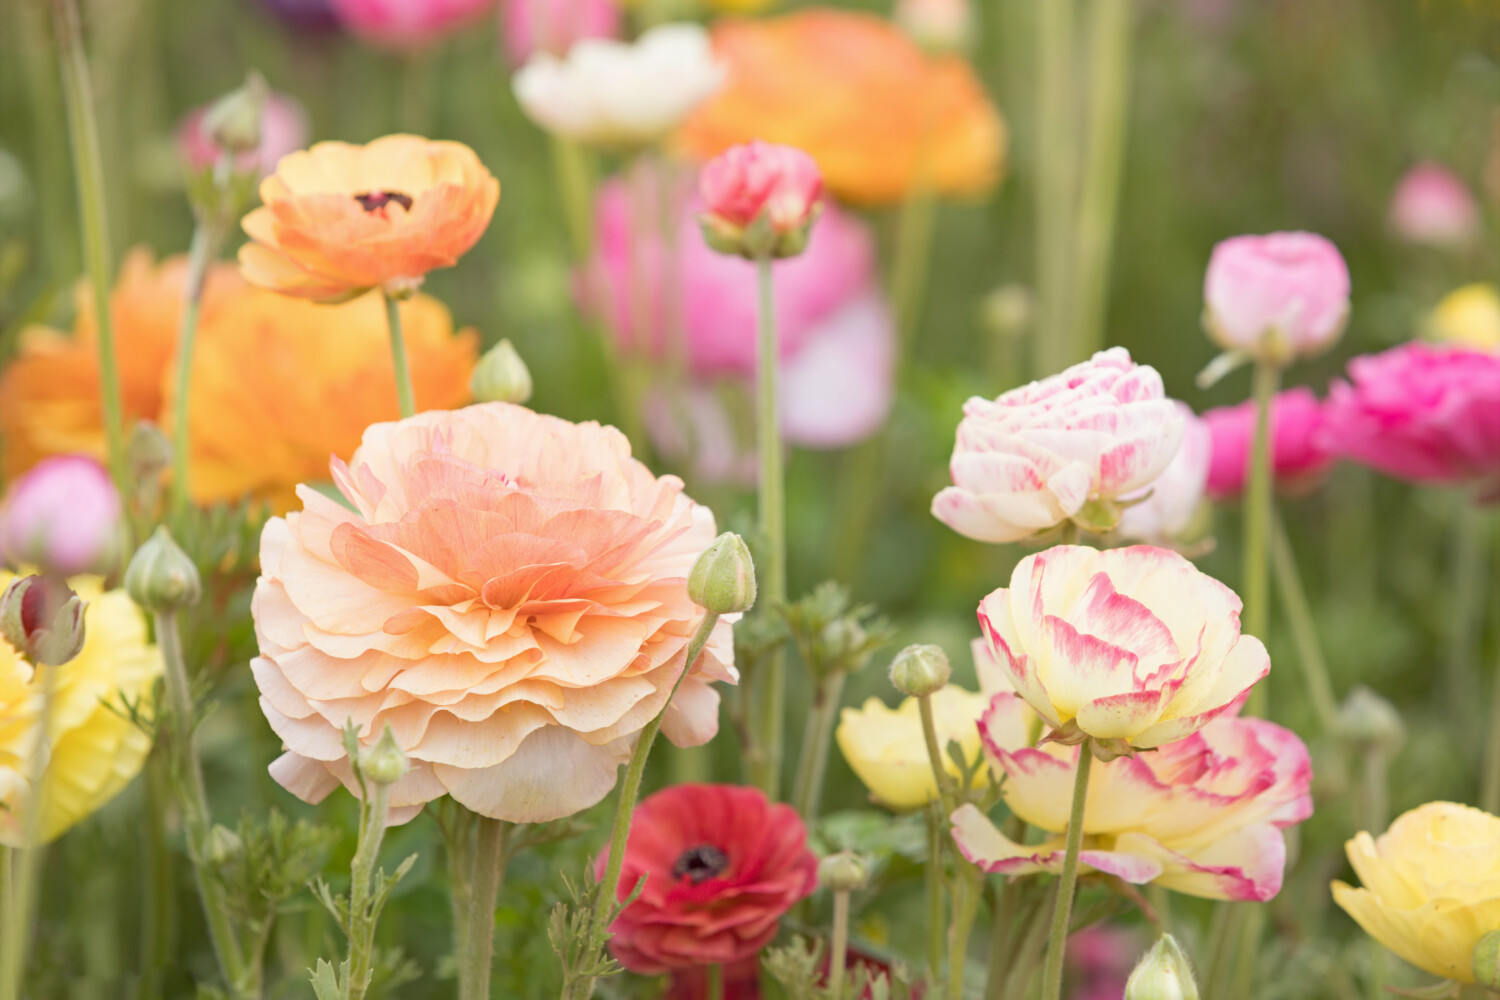 Photograph of a field of Ranunculus flowers